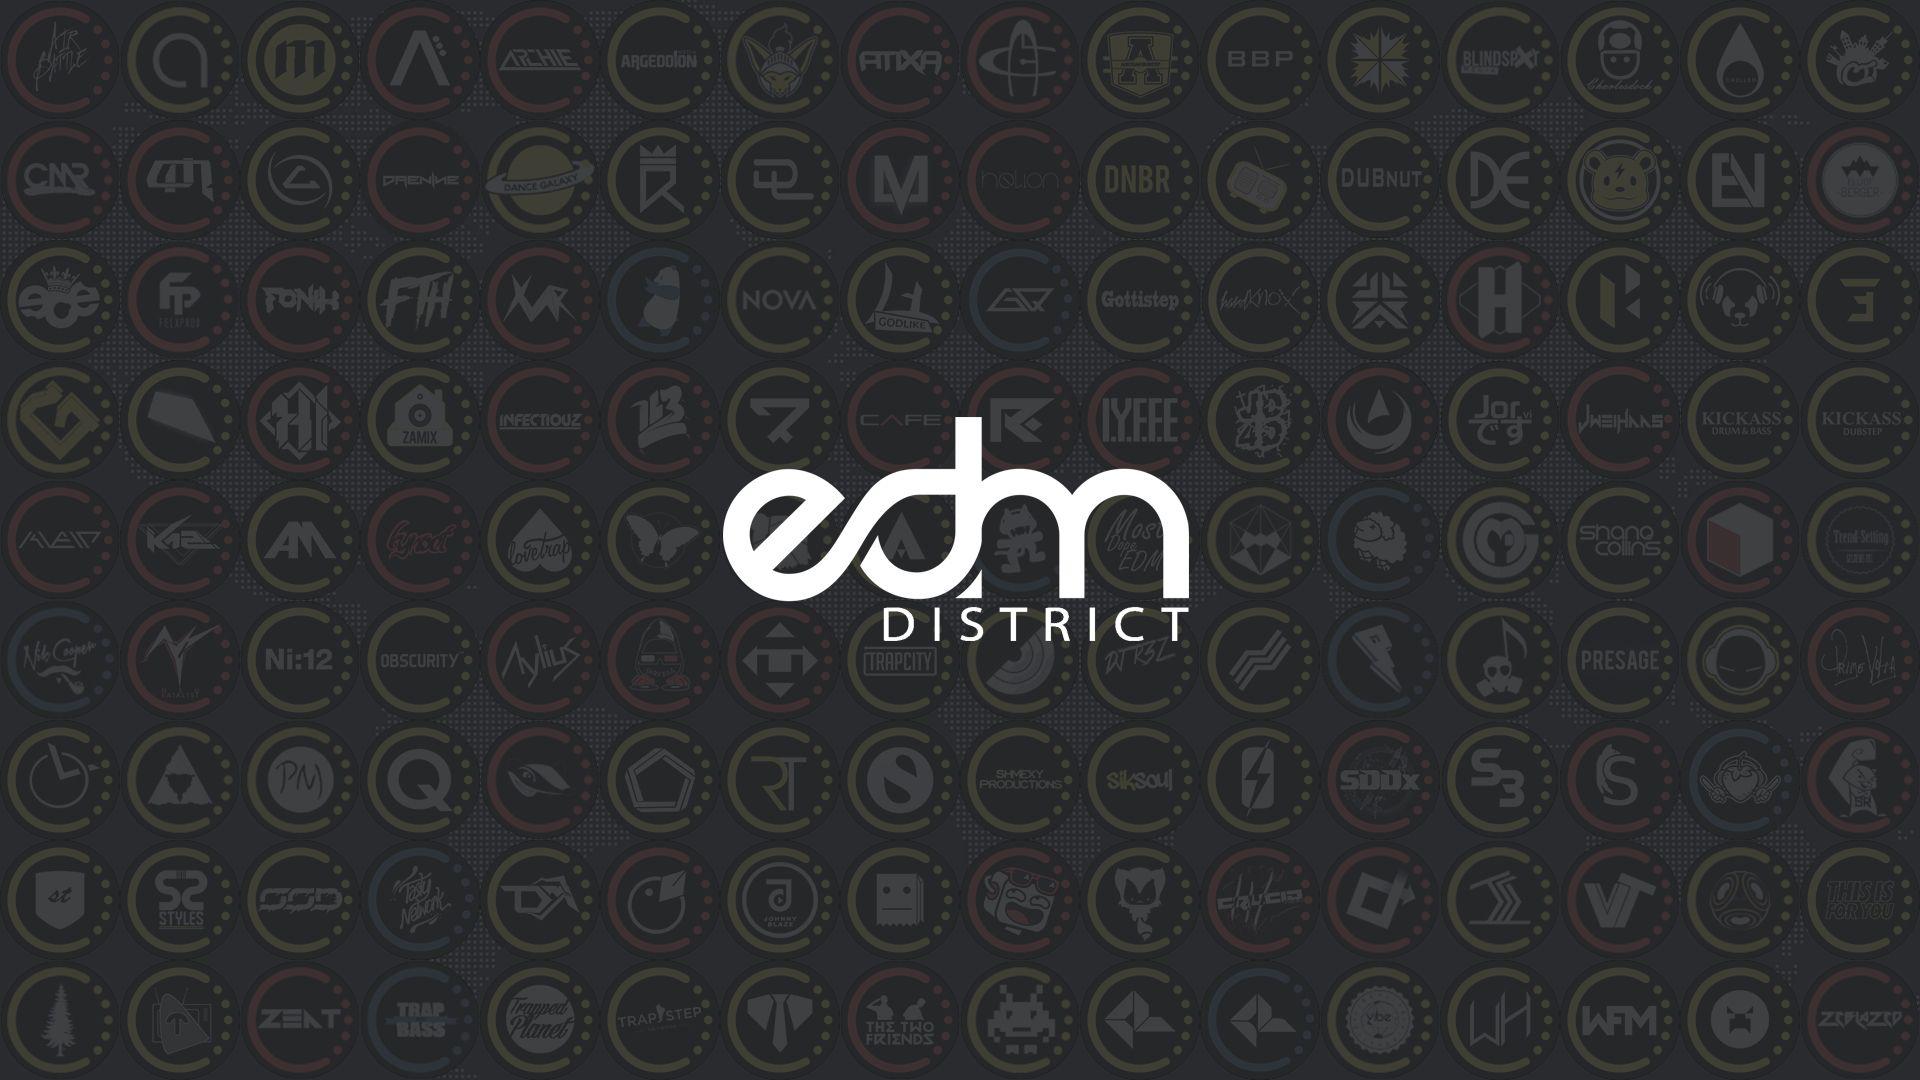 Top Selection of Edm Wallpaper